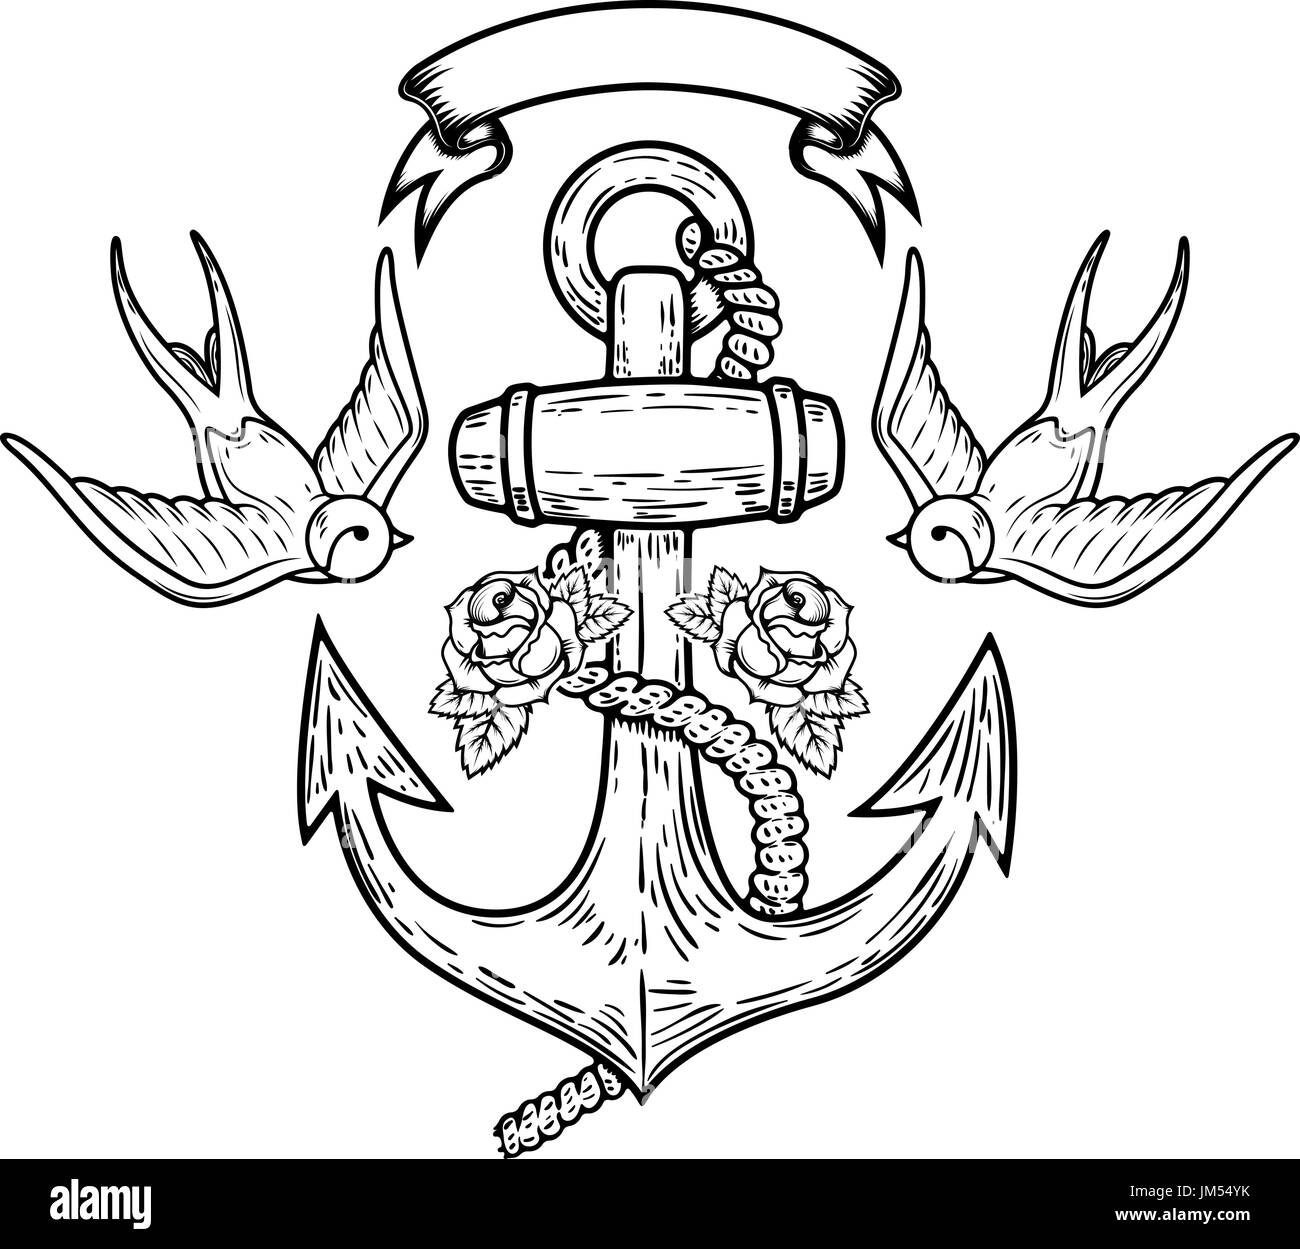 Anchor with swallows and roses Tattoo design Vector illustration Stock  Vector Image  Art  Alamy